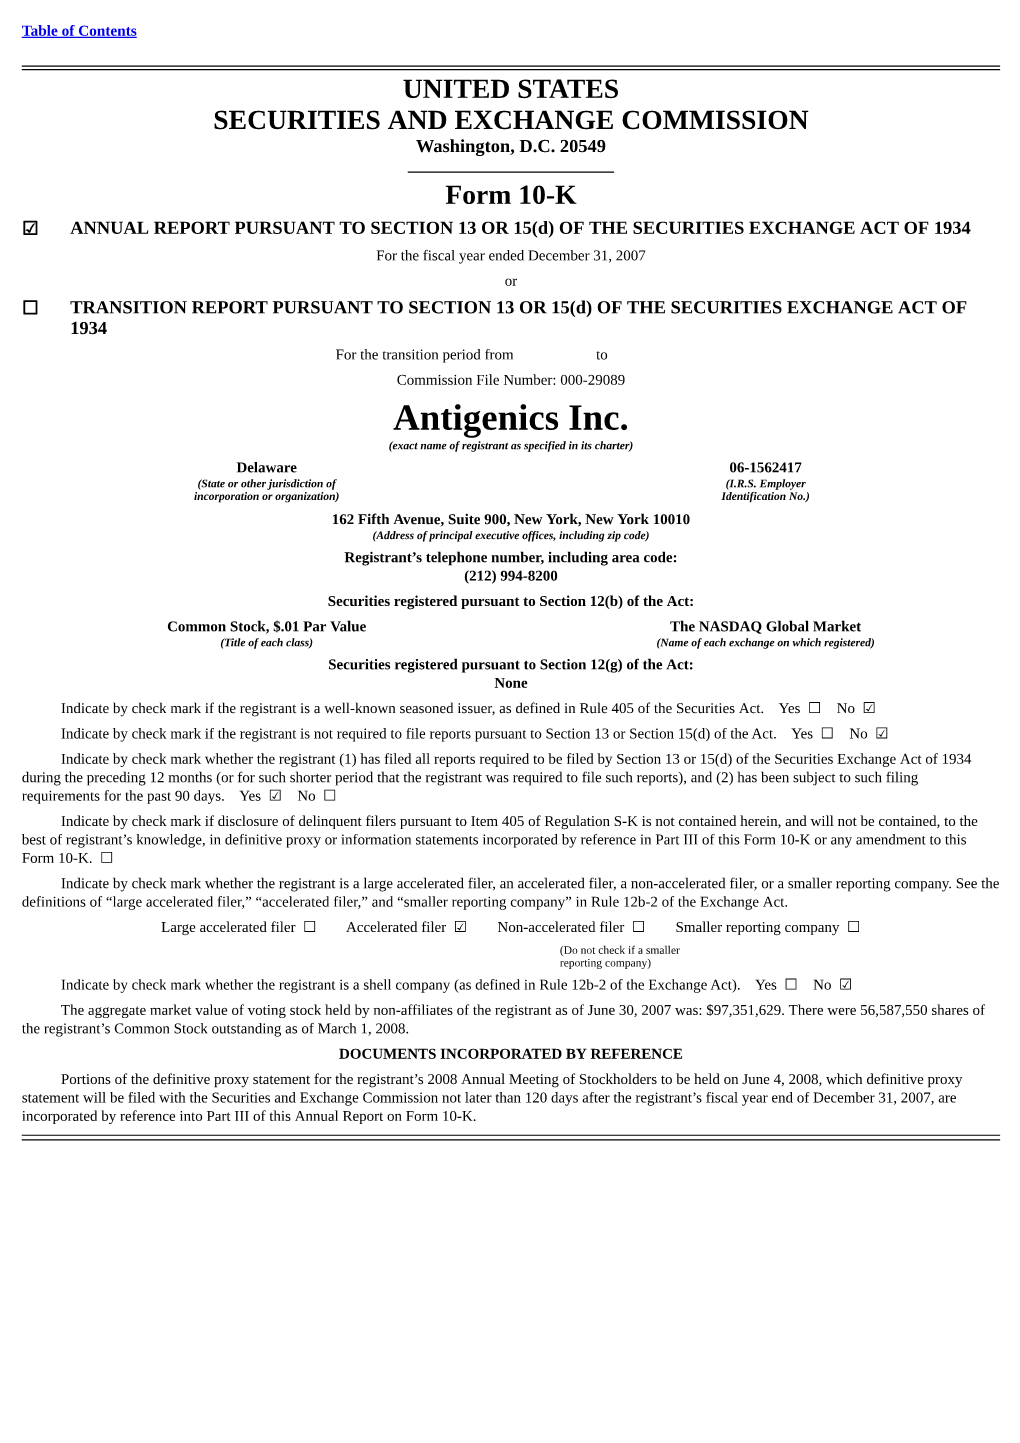 Antigenics Inc. (Exact Name of Registrant As Specified in Its Charter)